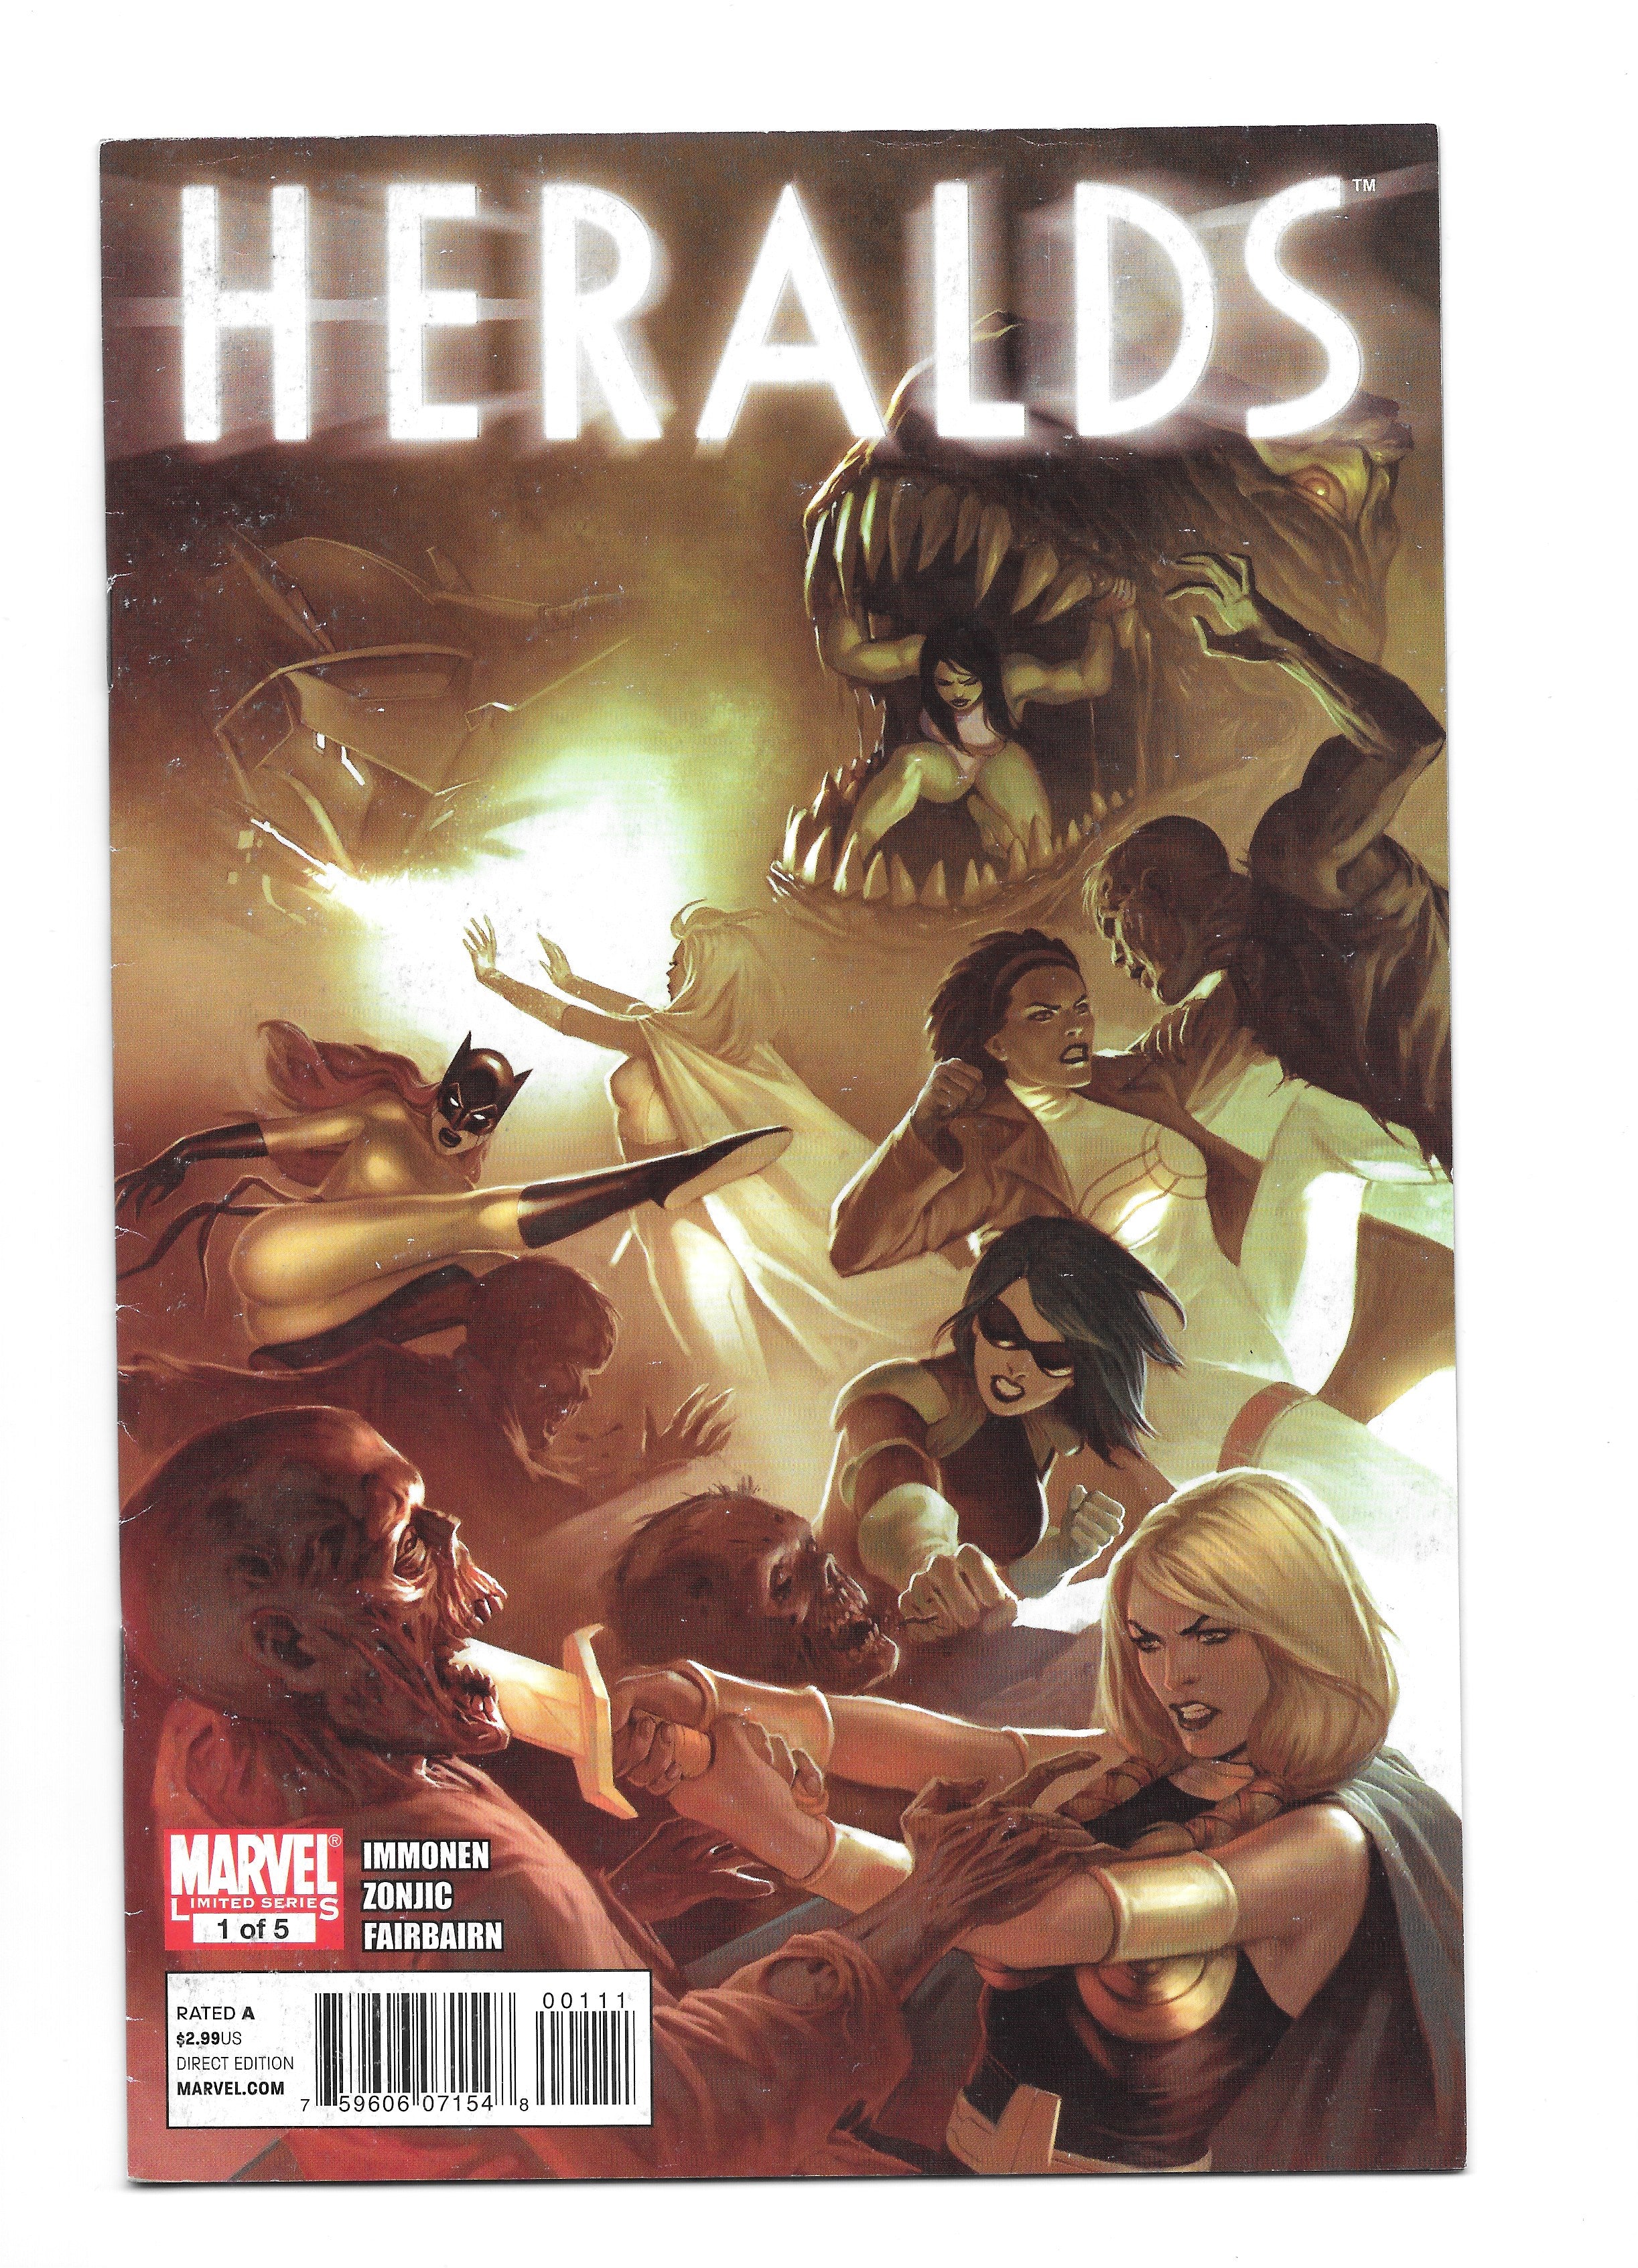 Photo of Heralds Issue 1 (of 5) comic sold by Stronghold Collectibles